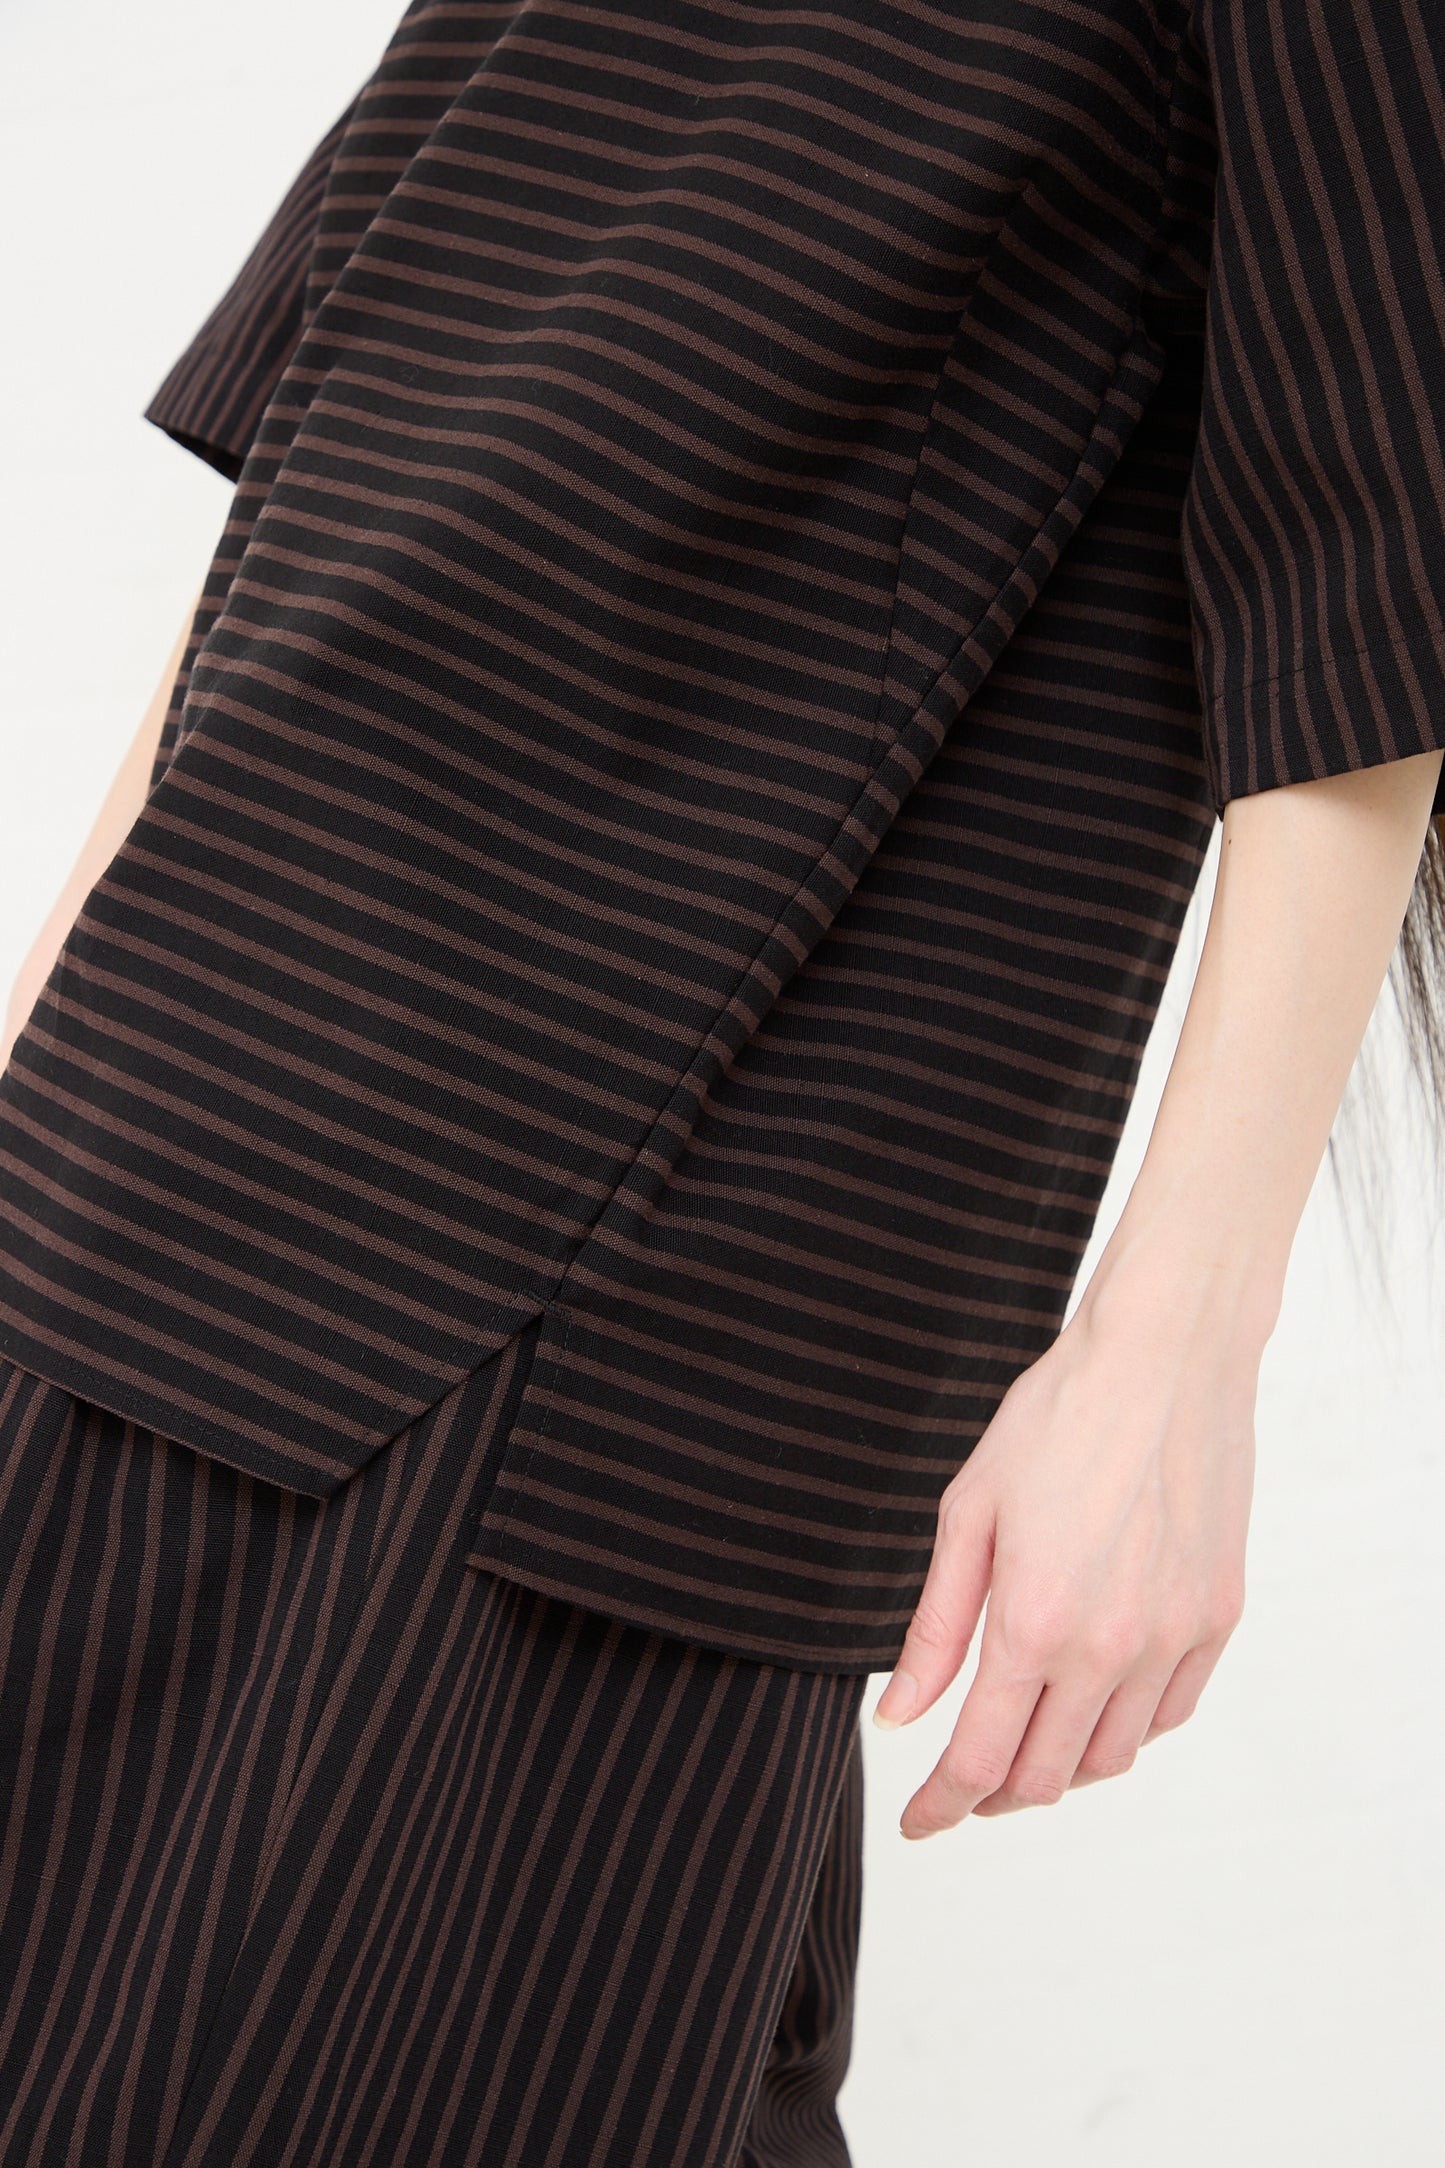 A close-up of a person wearing a Rachel Comey Ode Top in Black with a focus on the fabric's texture and boatneck collar pattern.